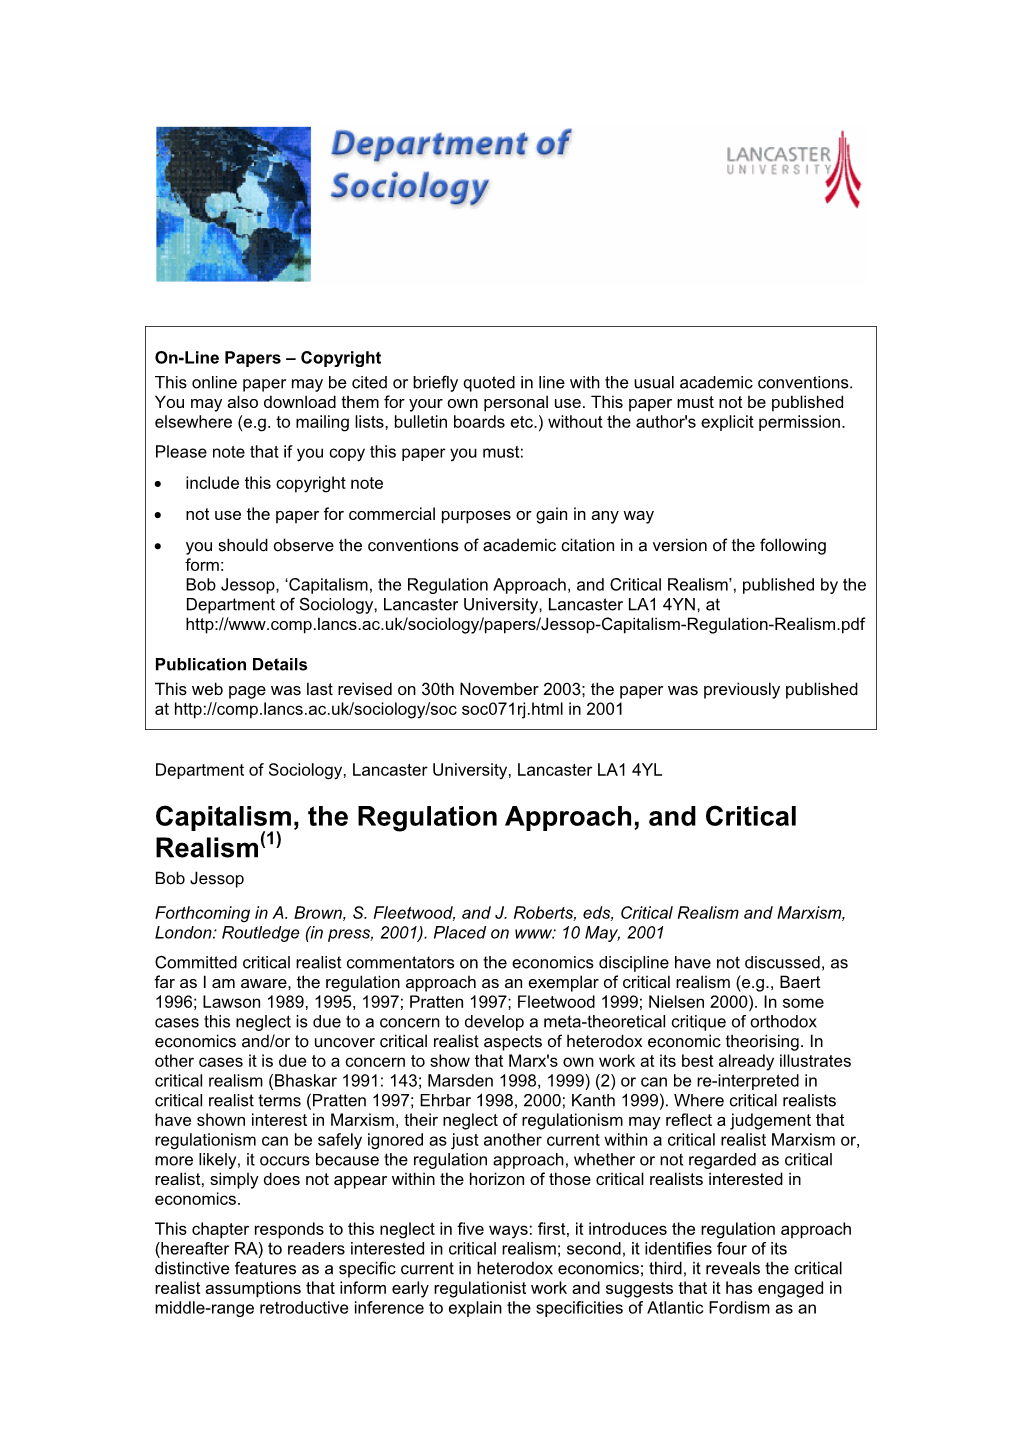 Capitalism, the Regulation Approach, and Critical Realism(1) Bob Jessop